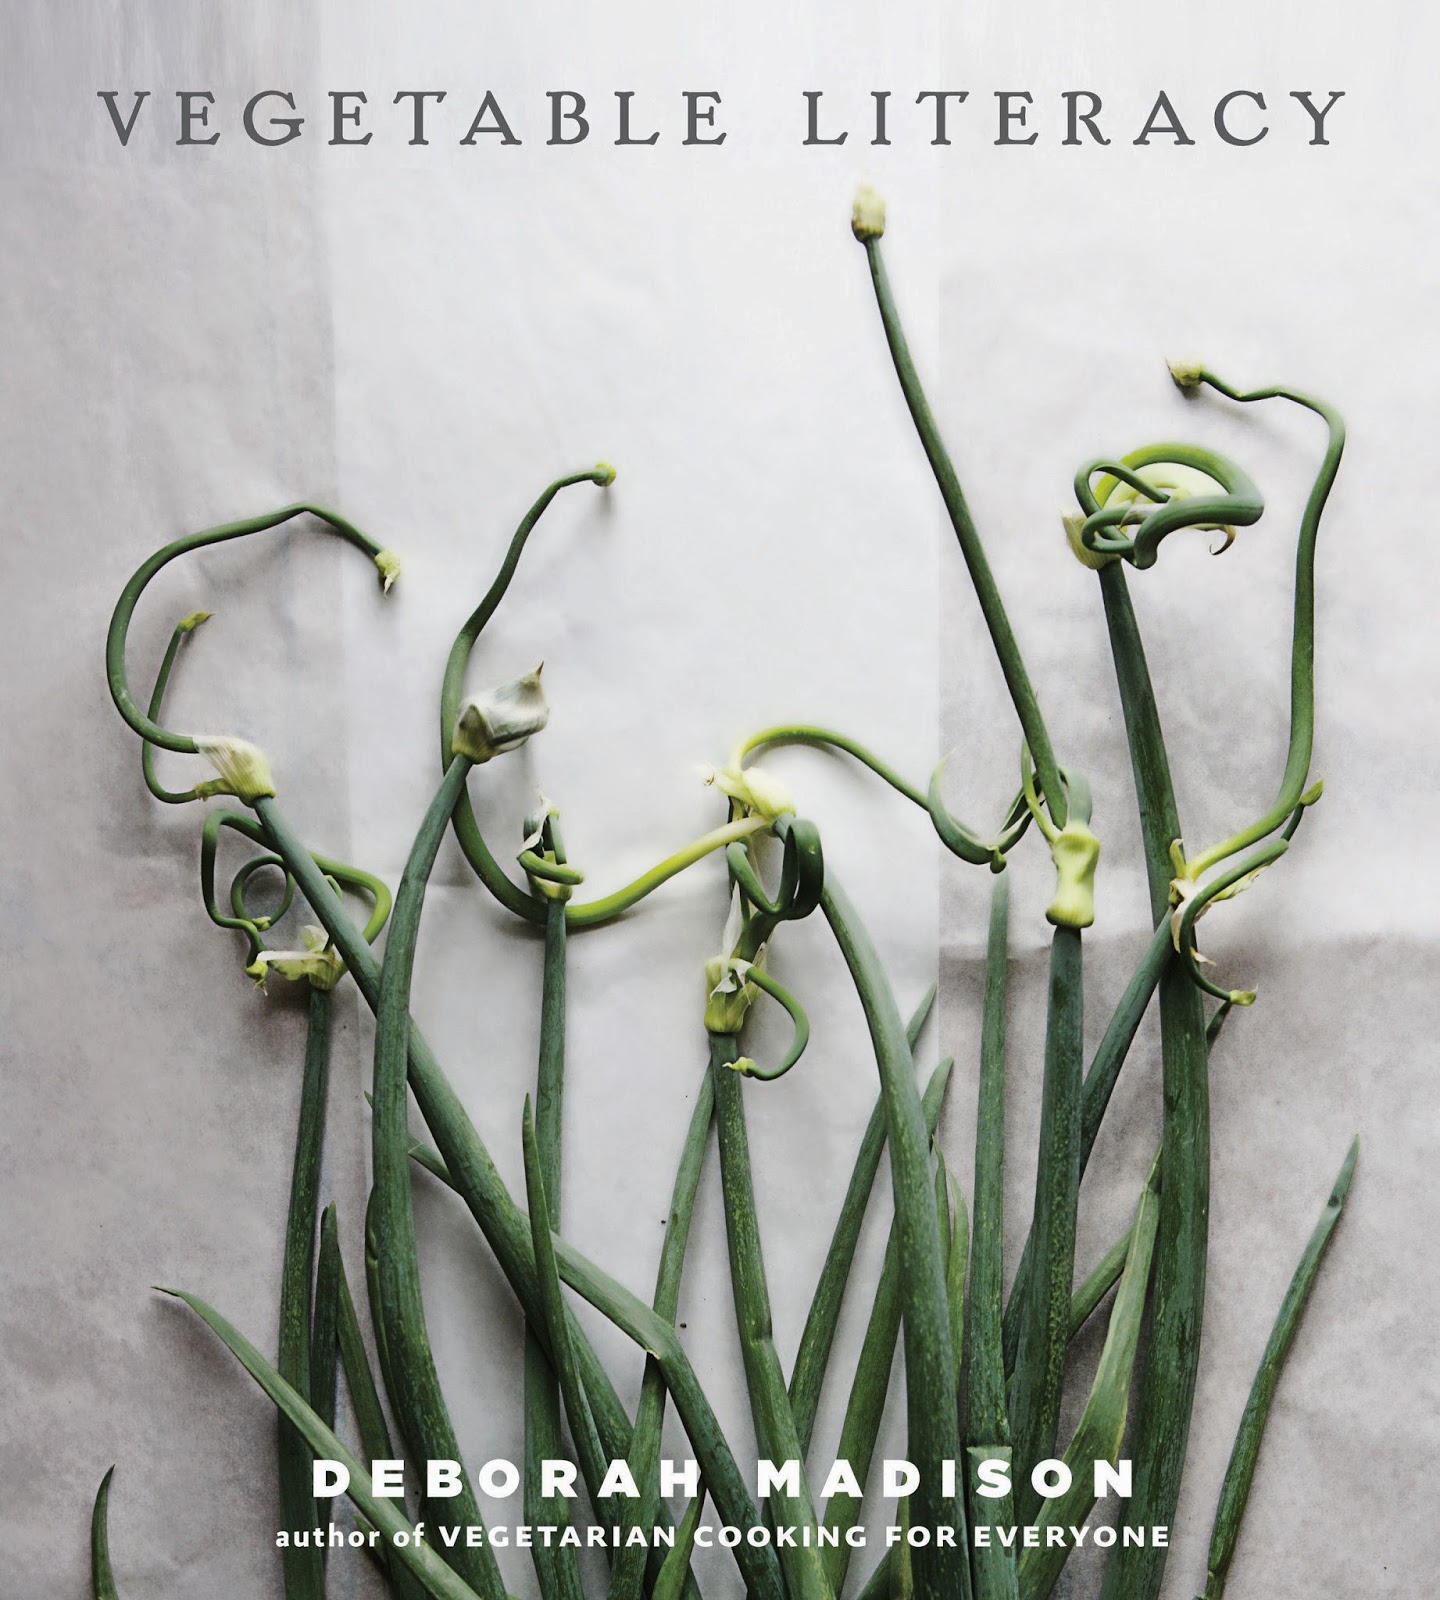 http://discover.halifaxpubliclibraries.ca/?q=title:vegetable%20literacy